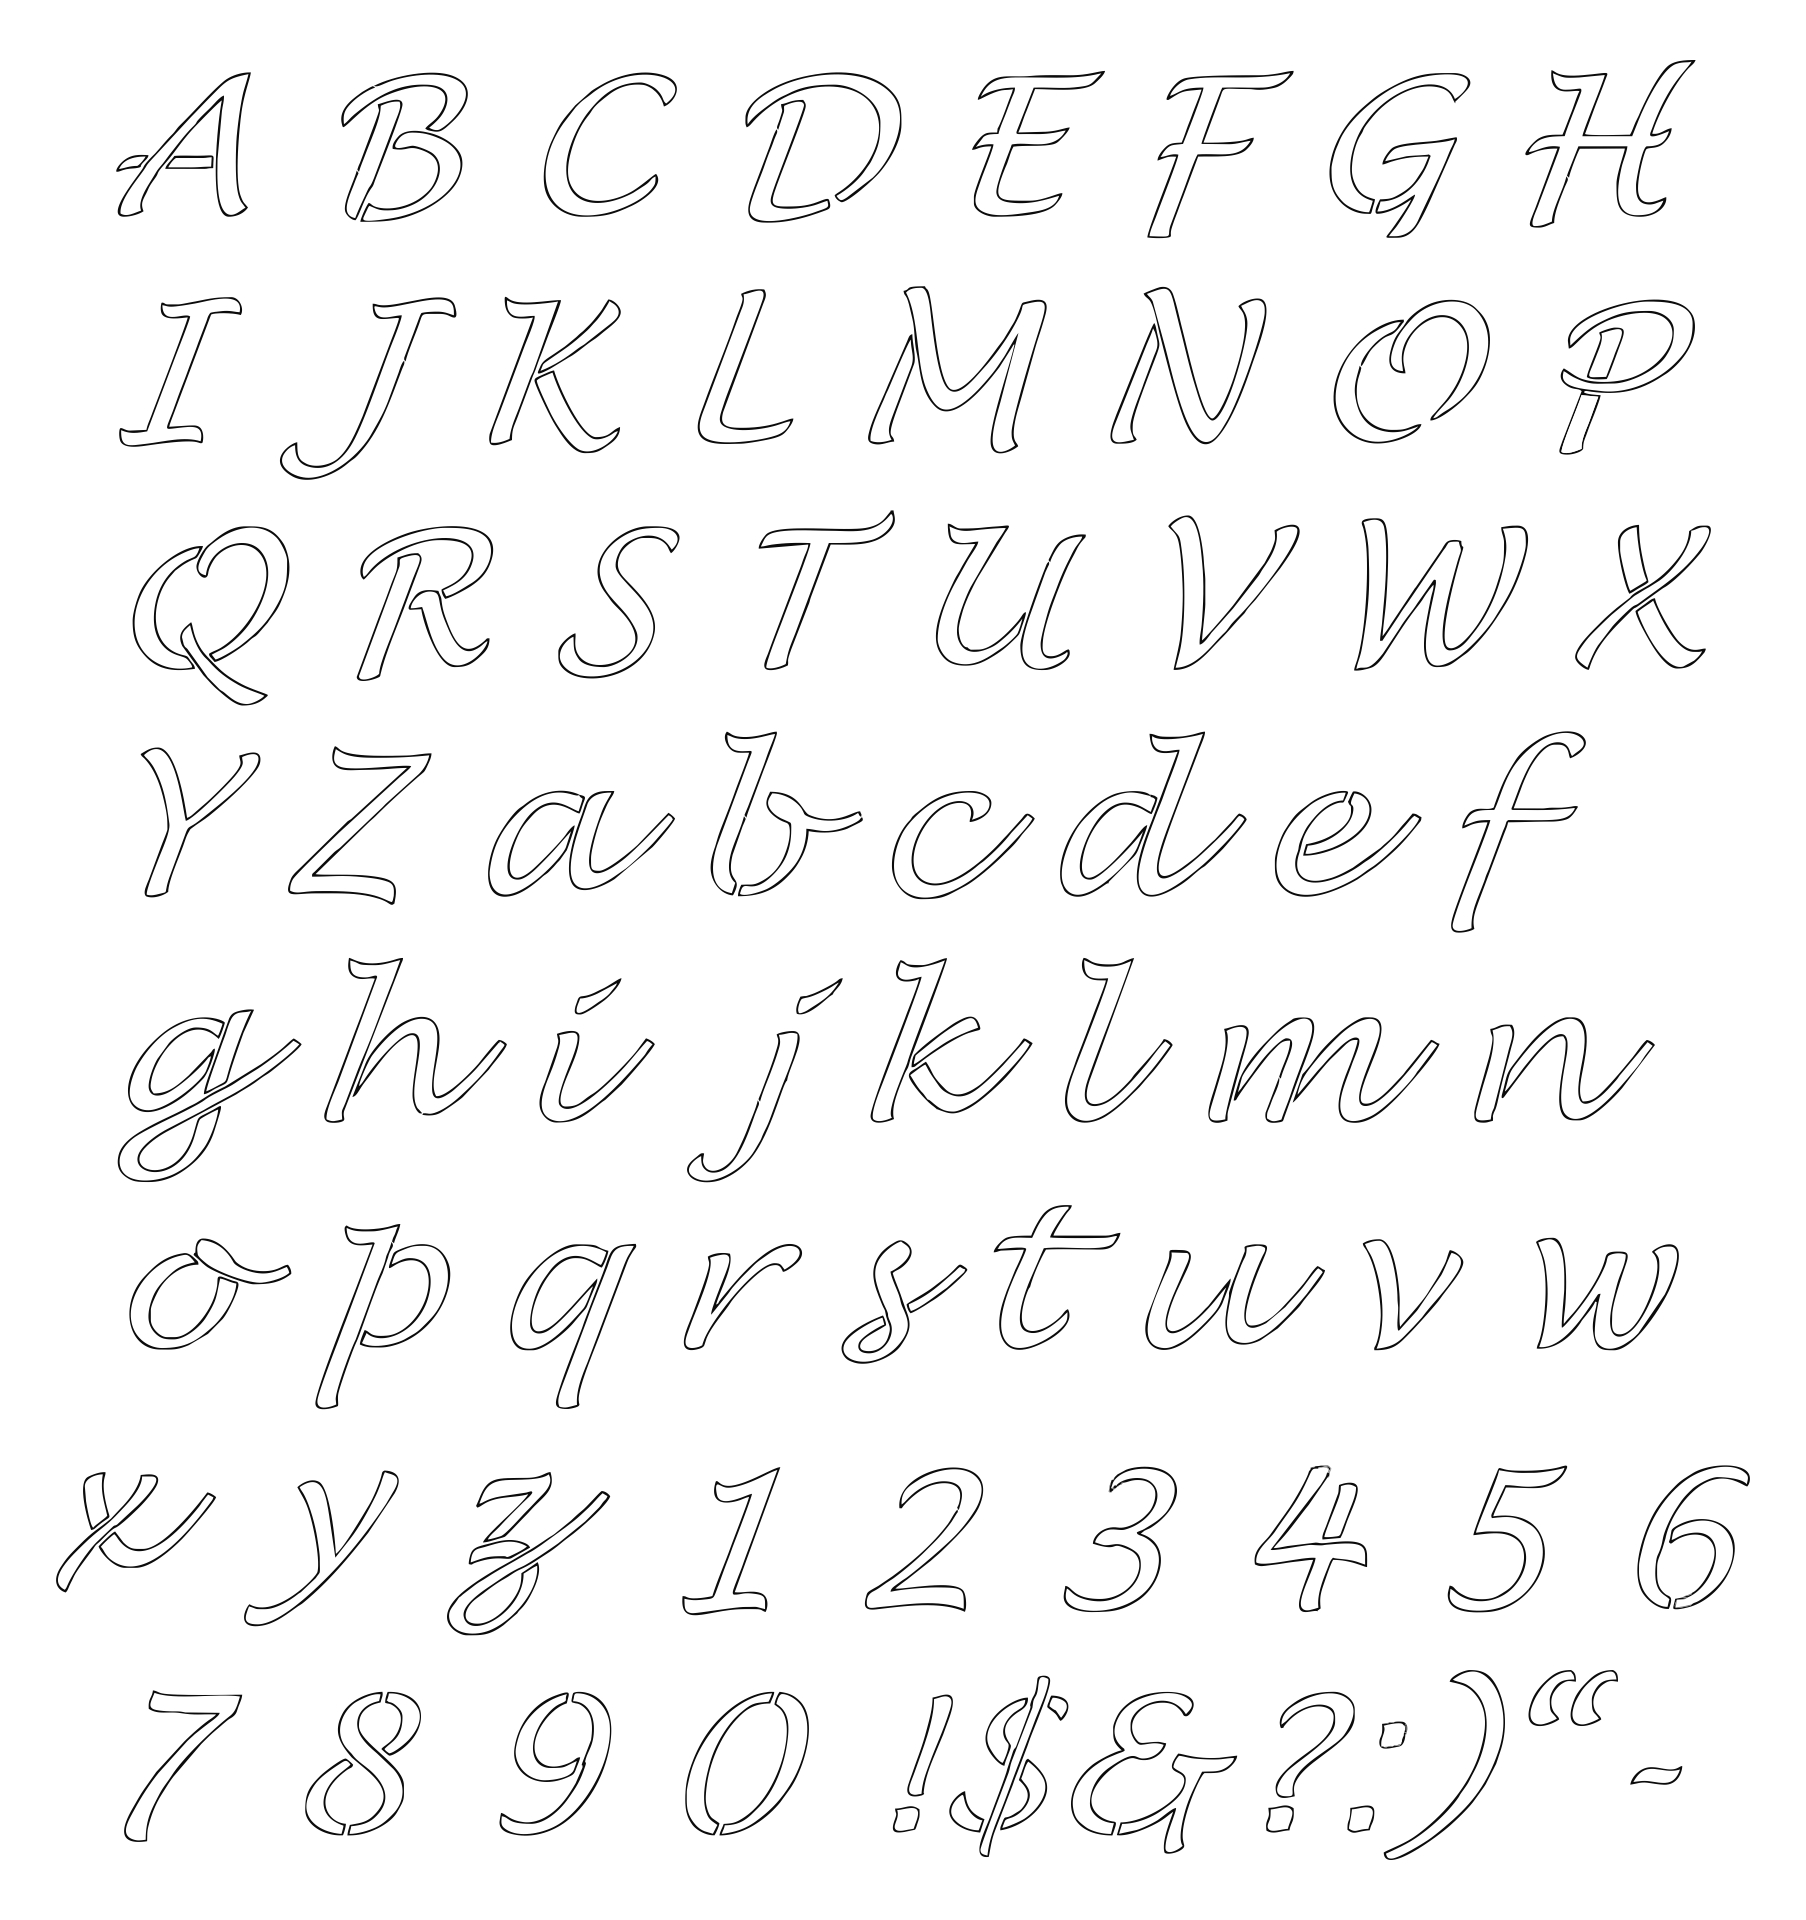 printable-stencils-free-alphabet-font-and-letter-templates-diy-projects